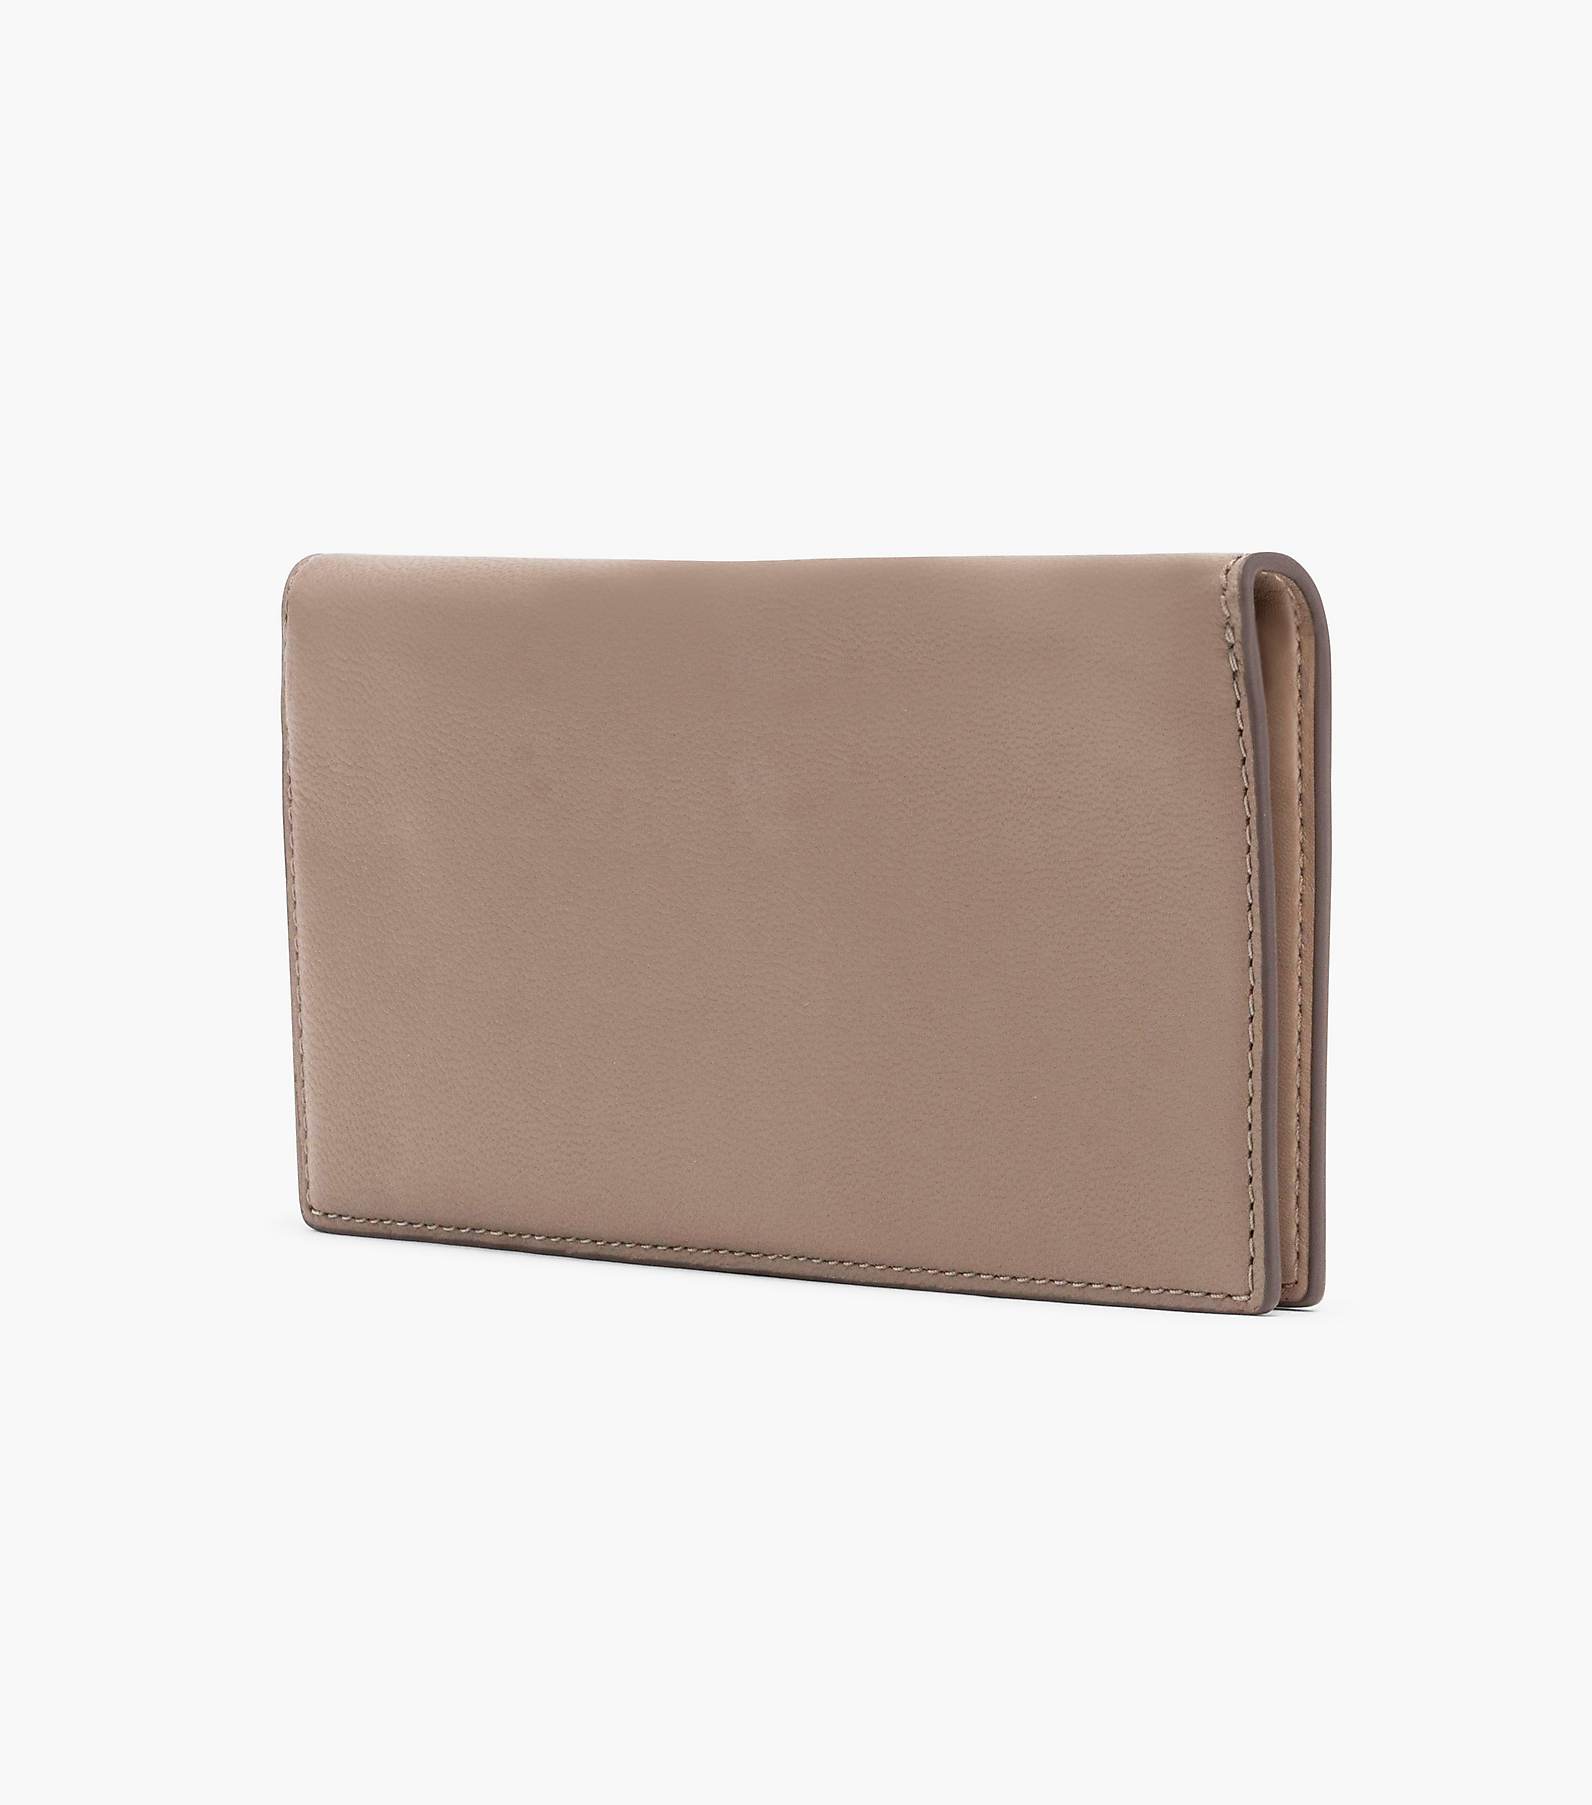 THE LEATHER SLIM 84 BIFOLD WALLET